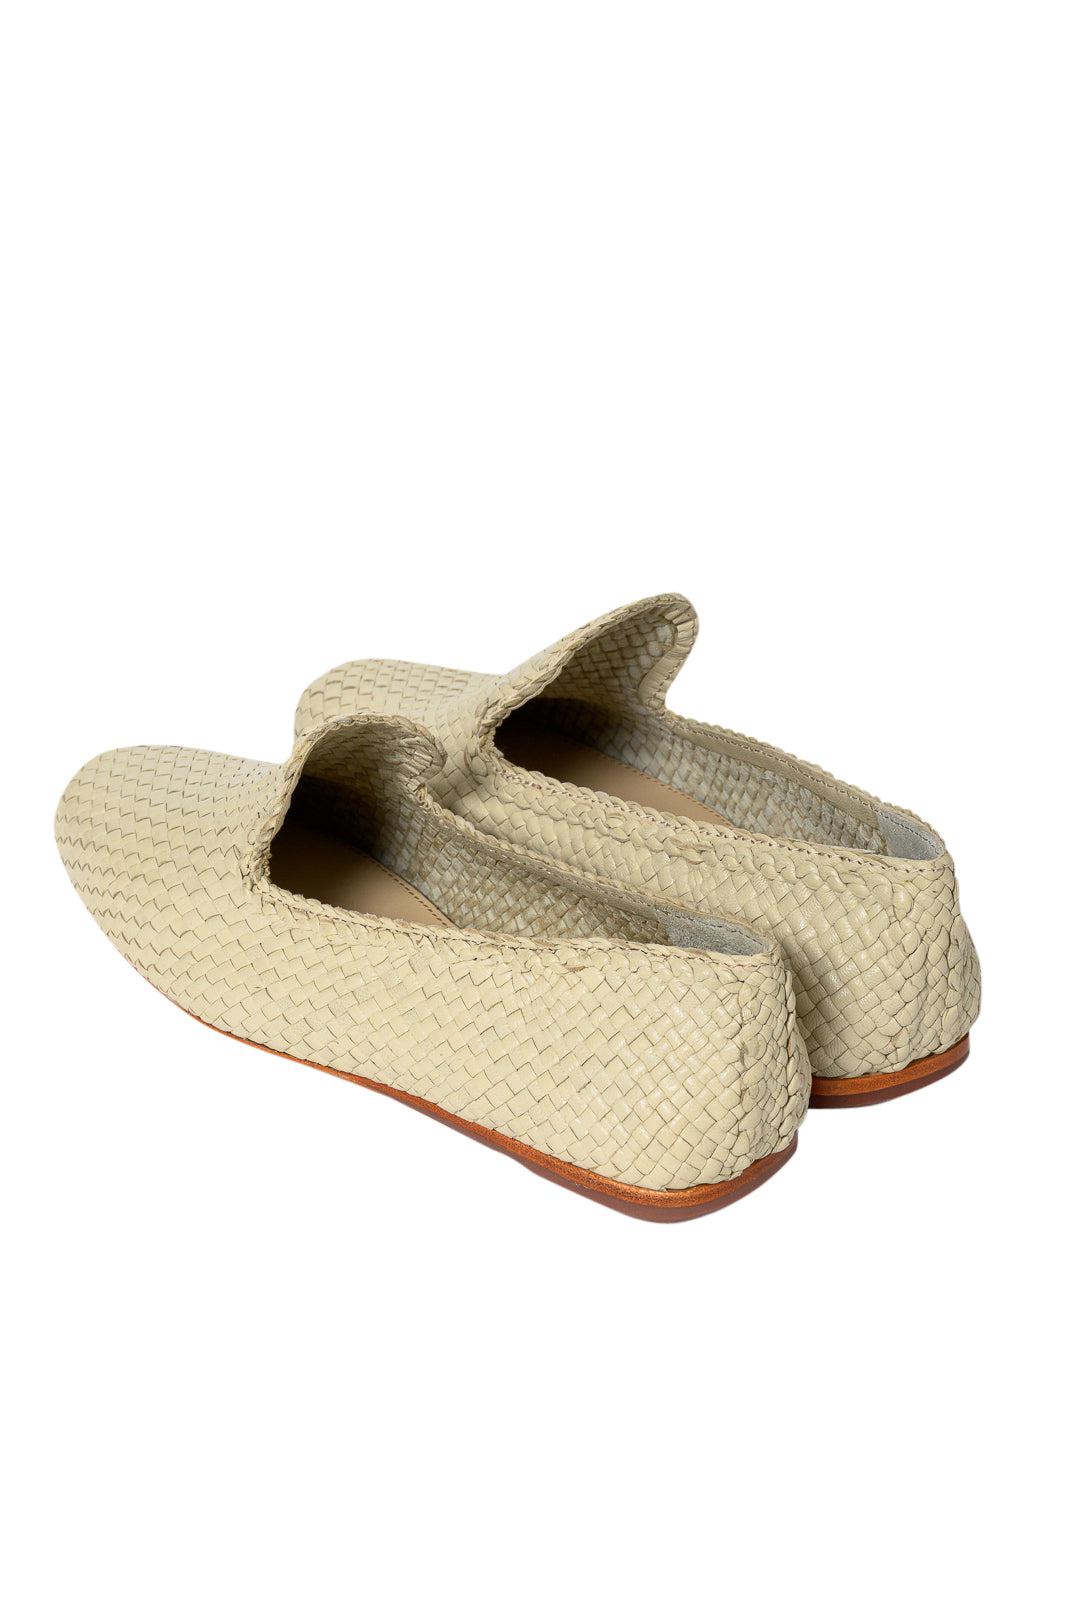 Dragon Diffusion-Damas Slippers-dgallerystore